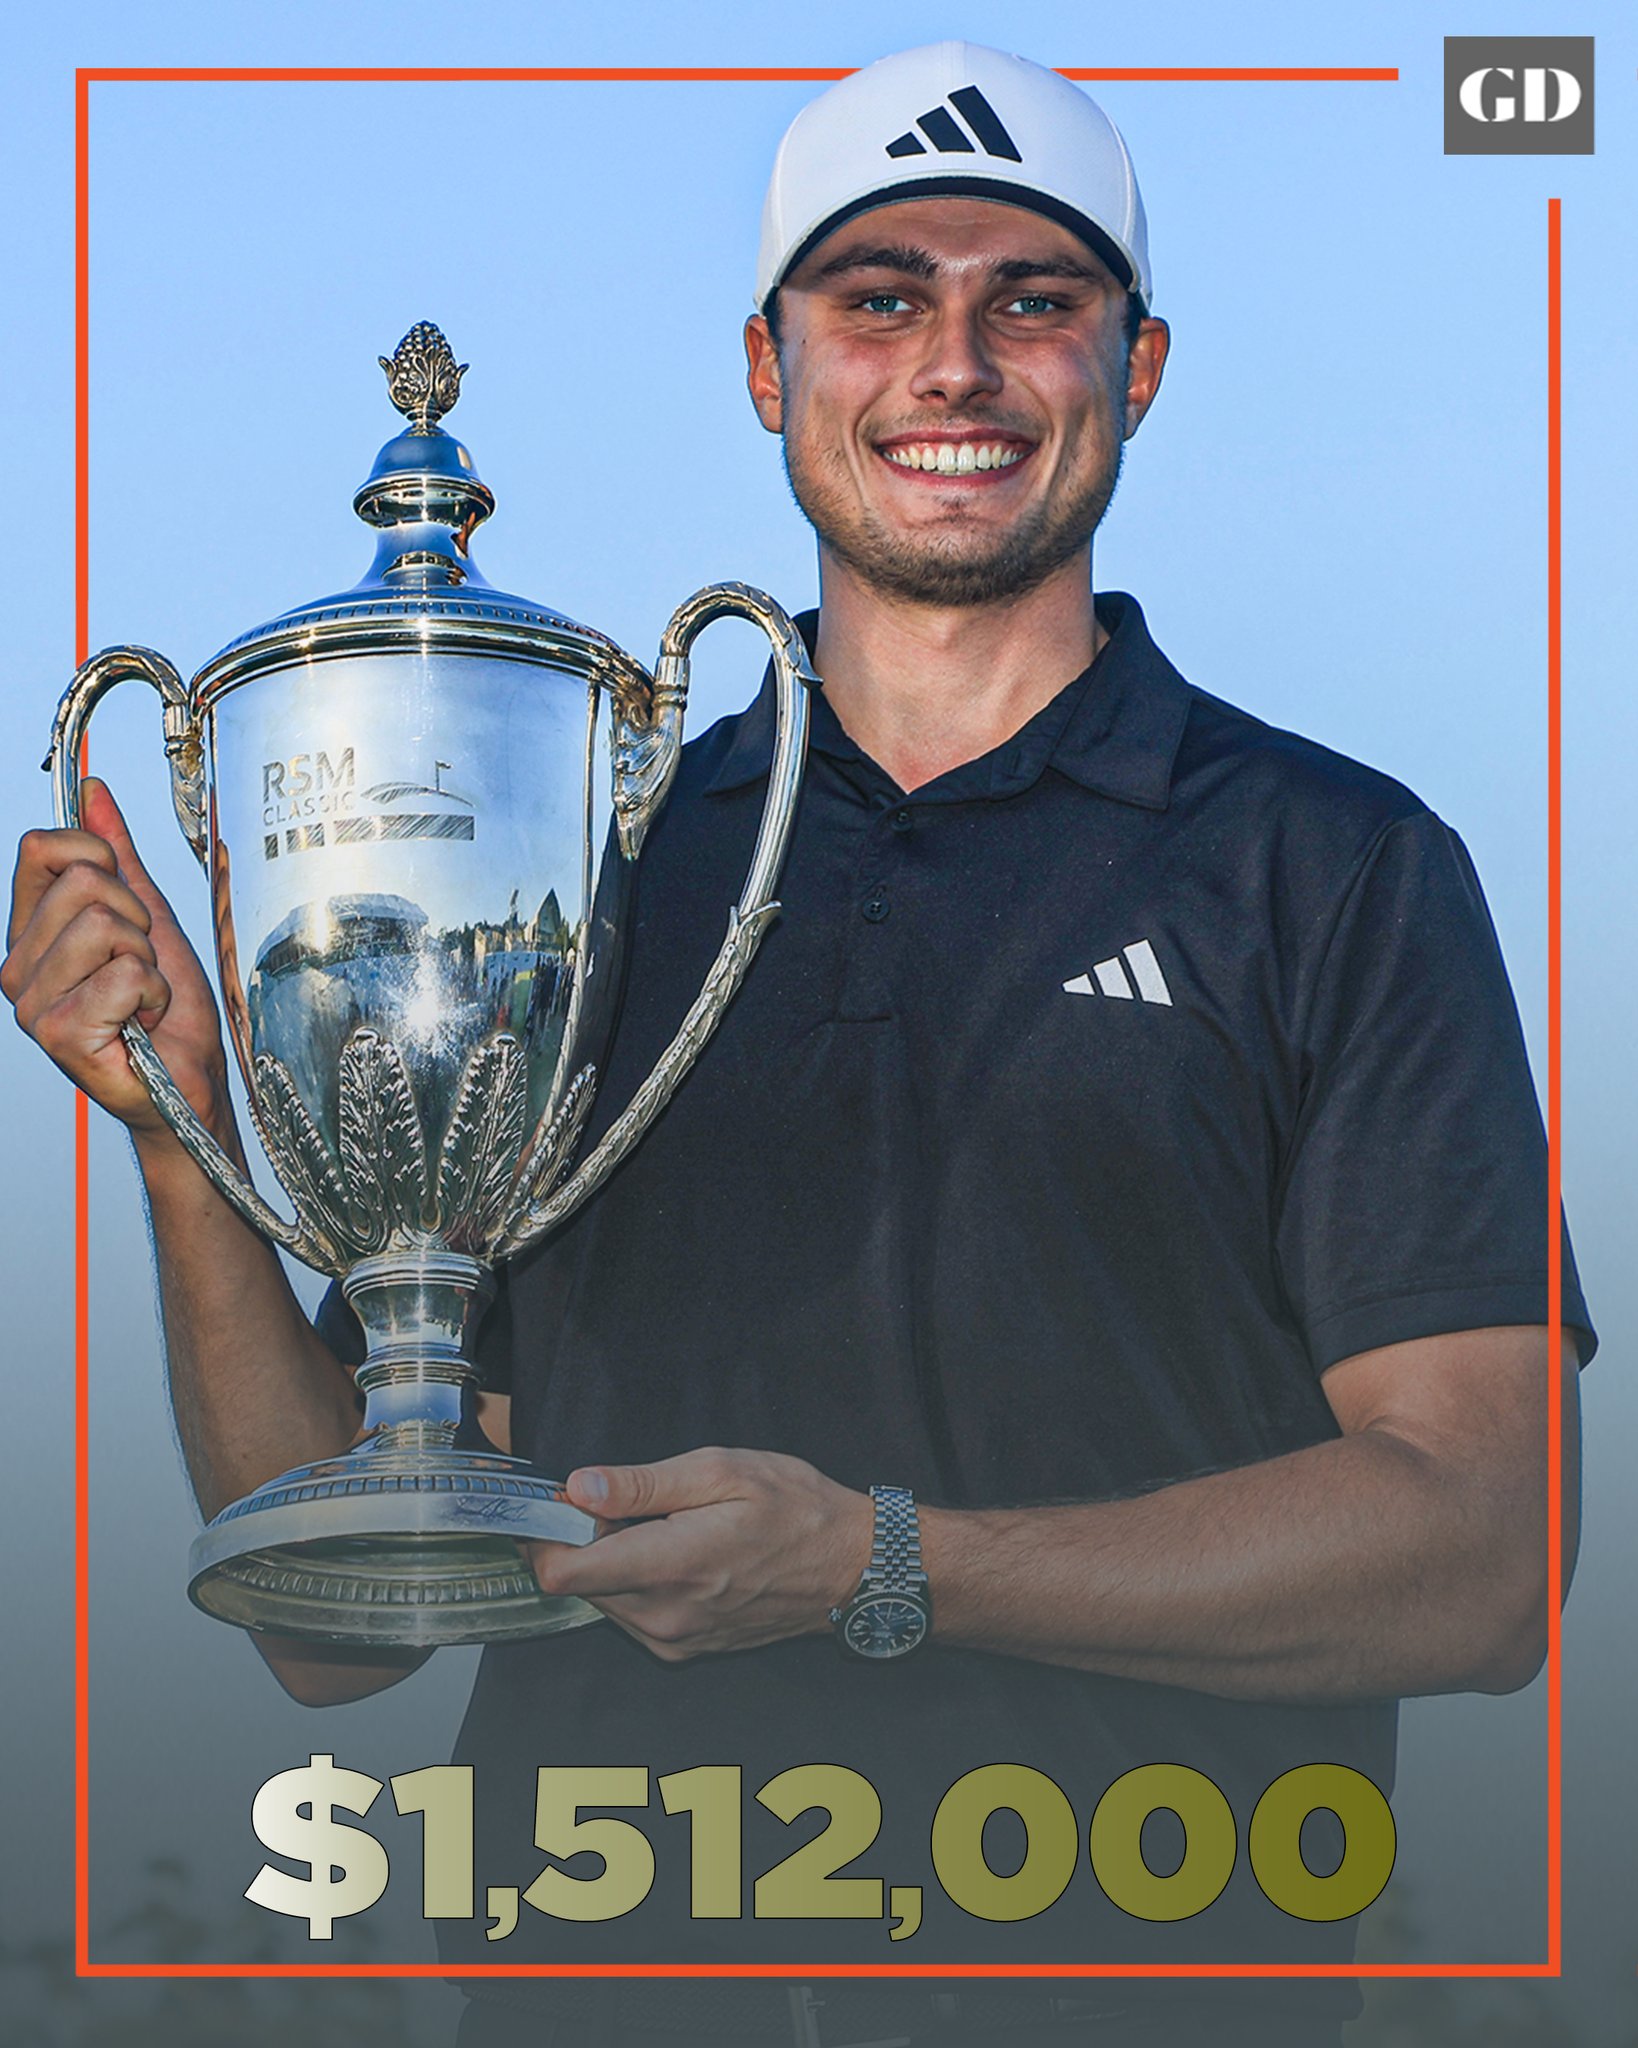 rsm classic 2023 payout